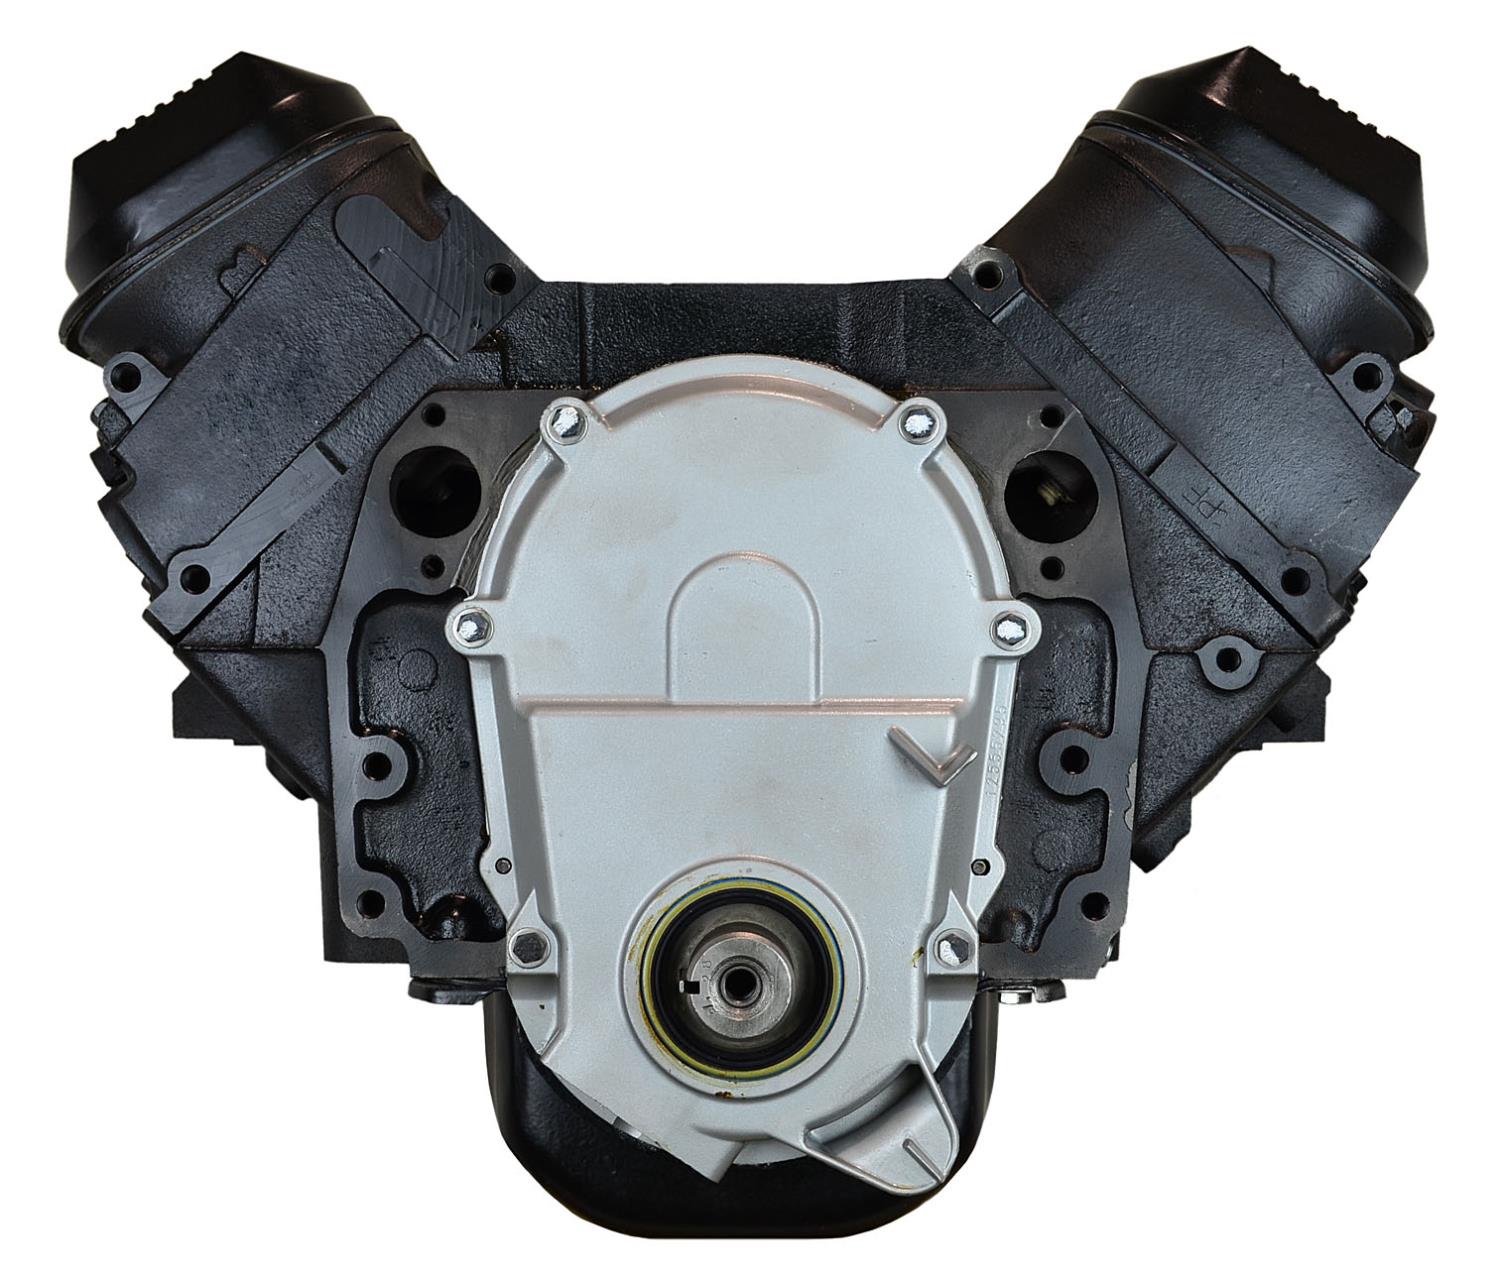 VCK2 Remanufactured Crate Engine for 1996-2000 Chevy/GMC C/K Truck, SUV, & Van with 454ci V8